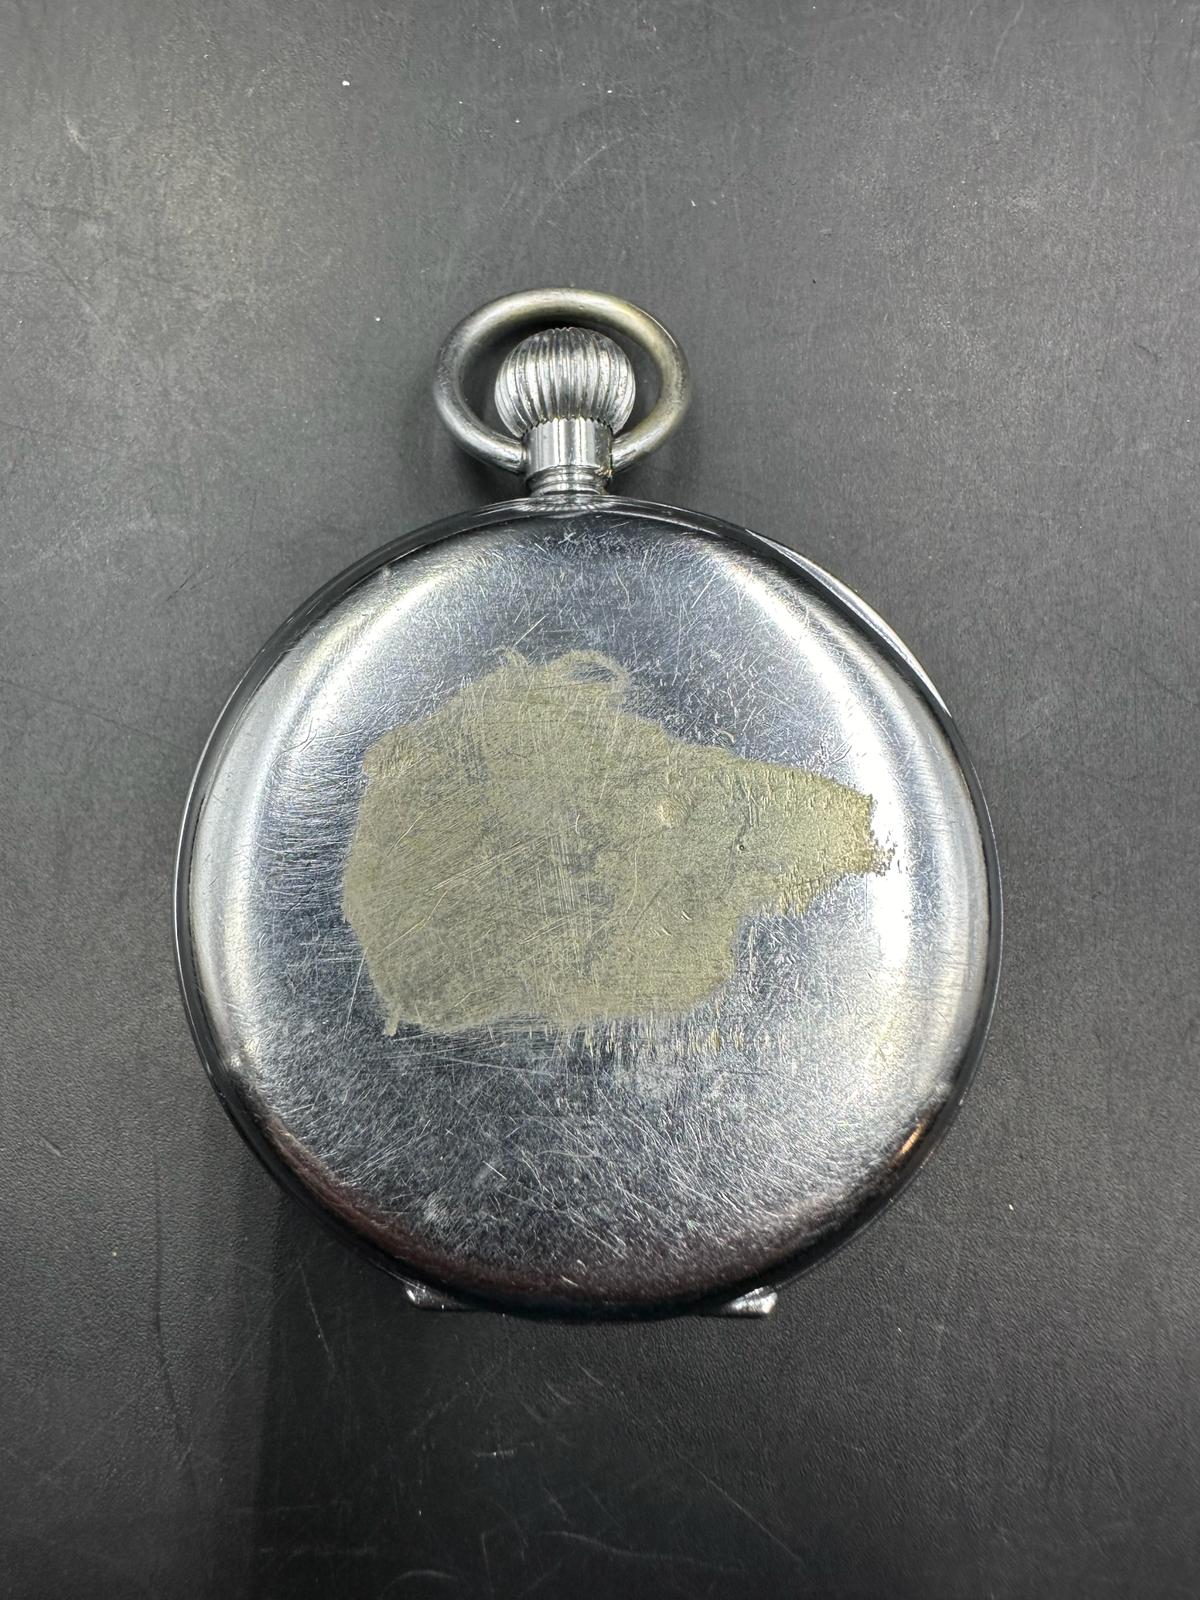 A vintage Bravingtons Renown pocket watch in a nickel chromium plated cess - Image 3 of 6